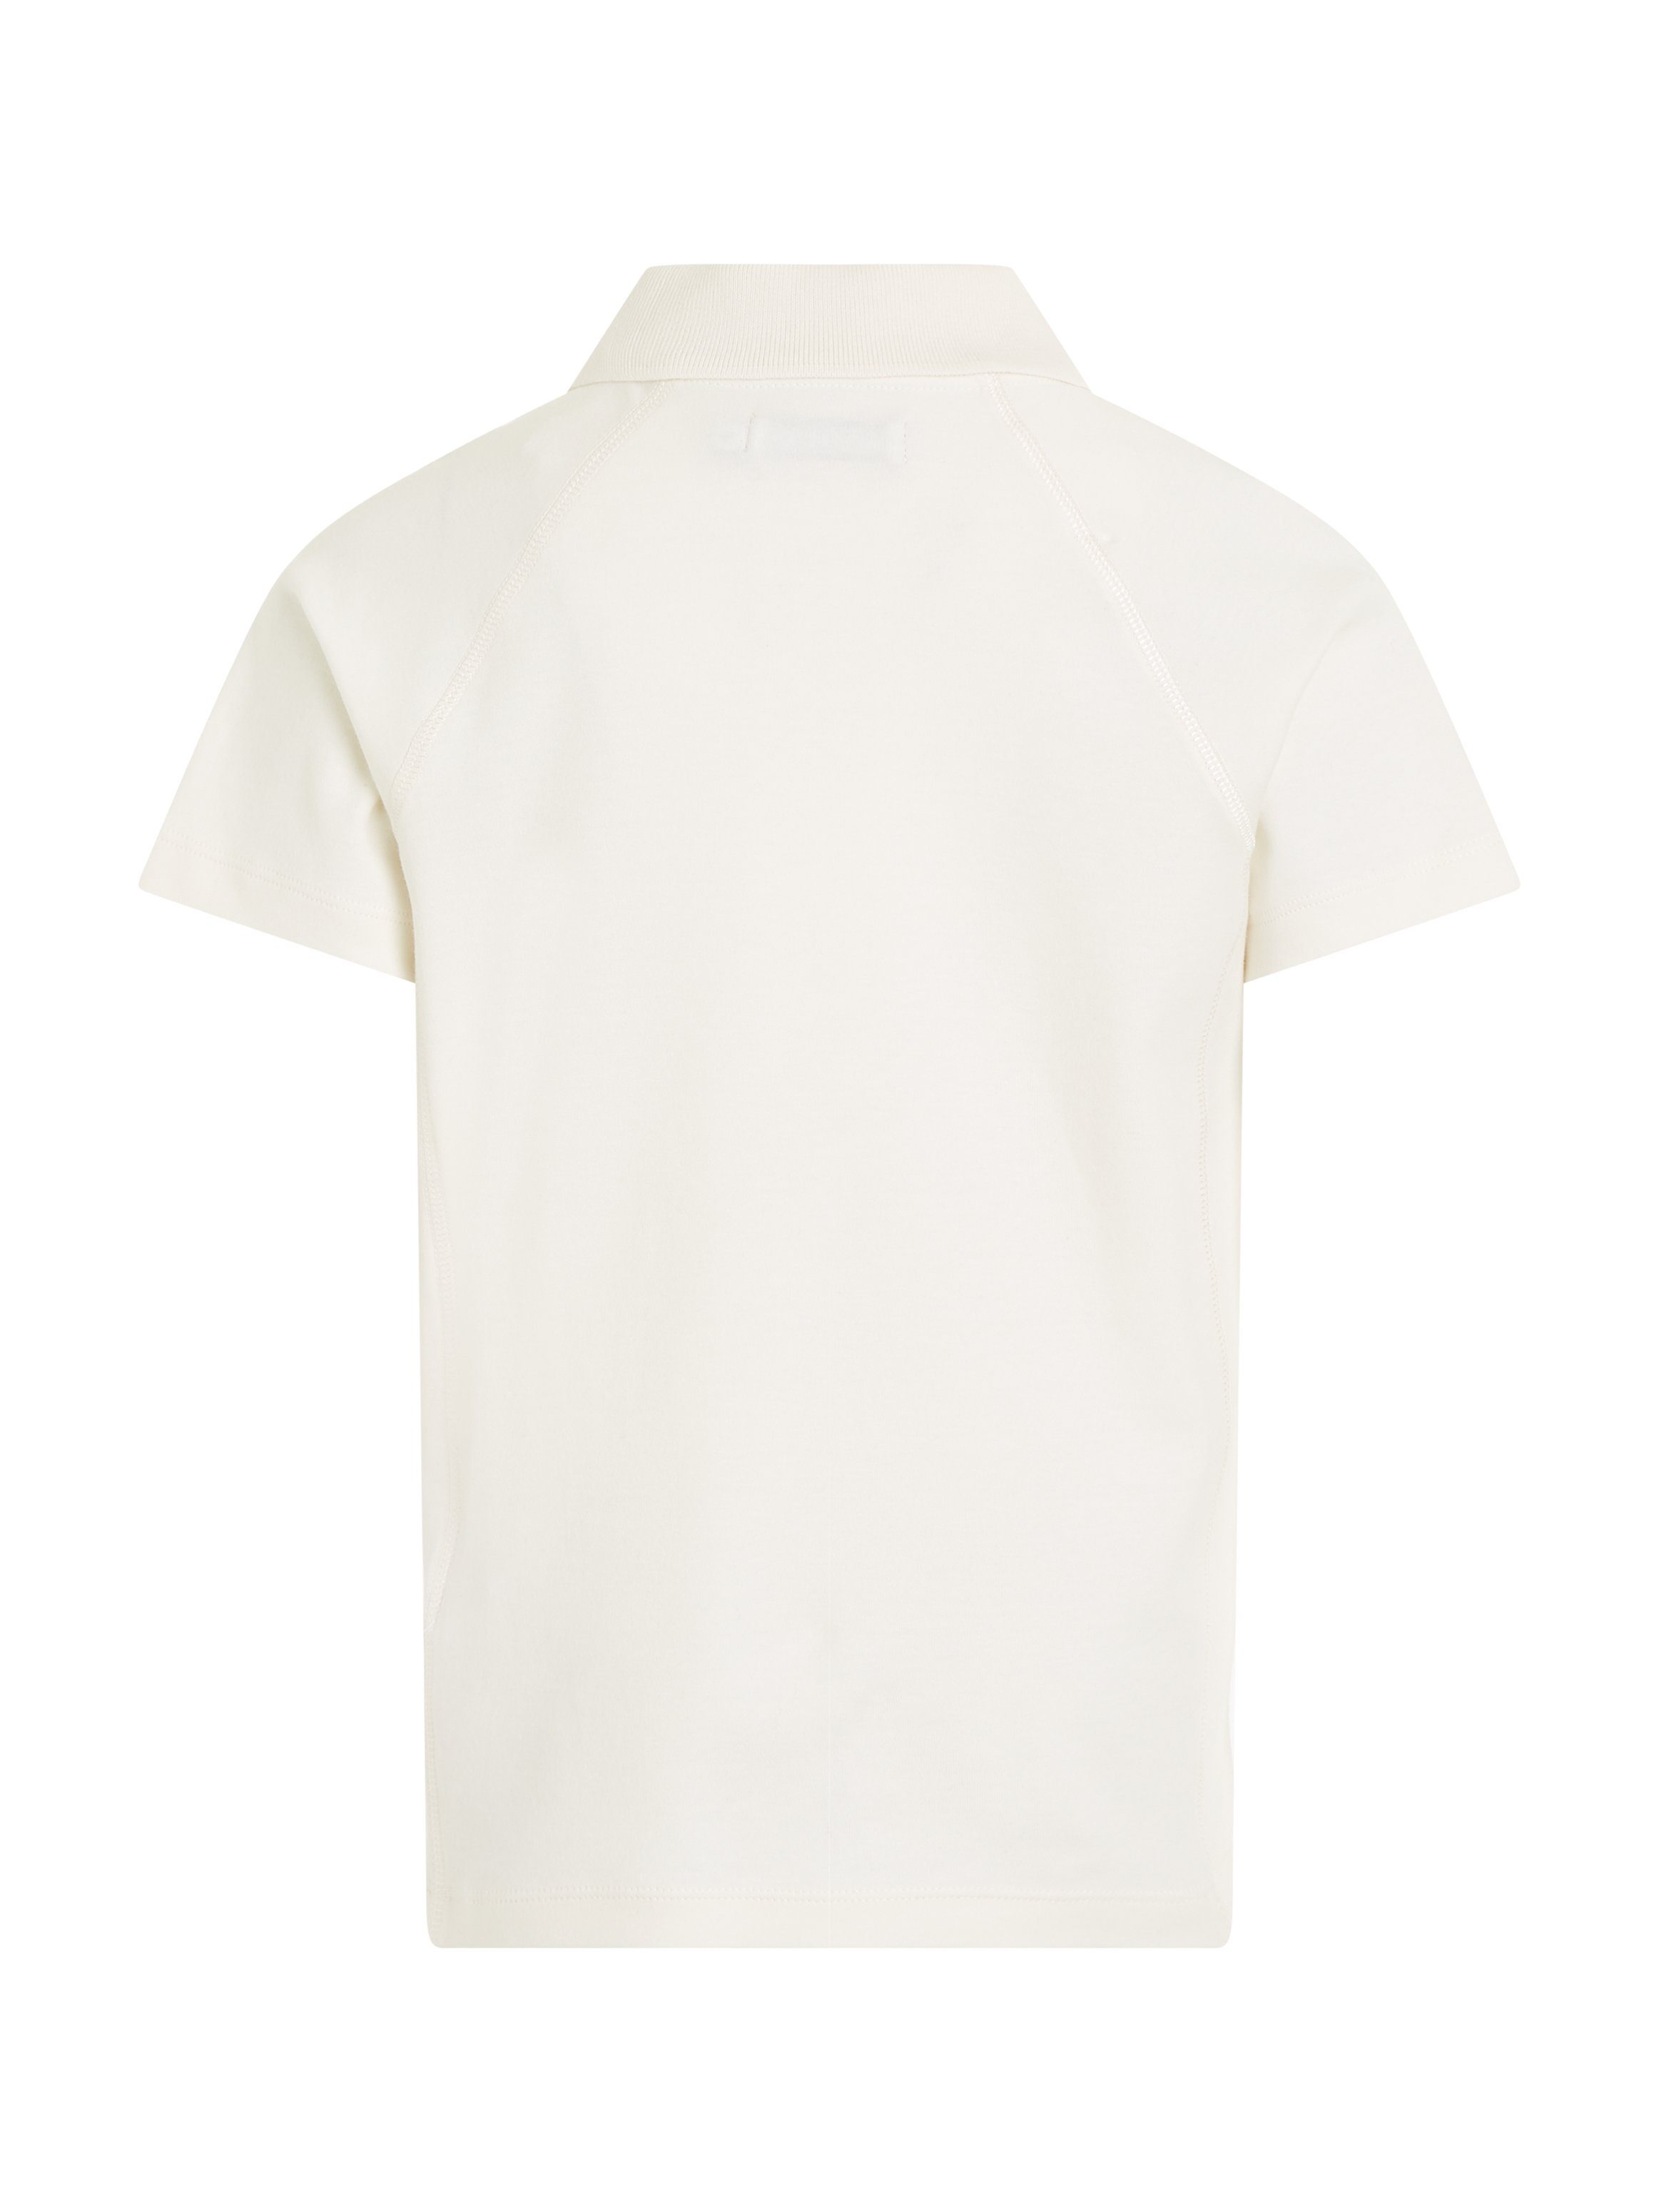 JERSEY CEREMONY White mit Jeans POLO Bright SOFT Poloshirt Logopatch Klein Calvin